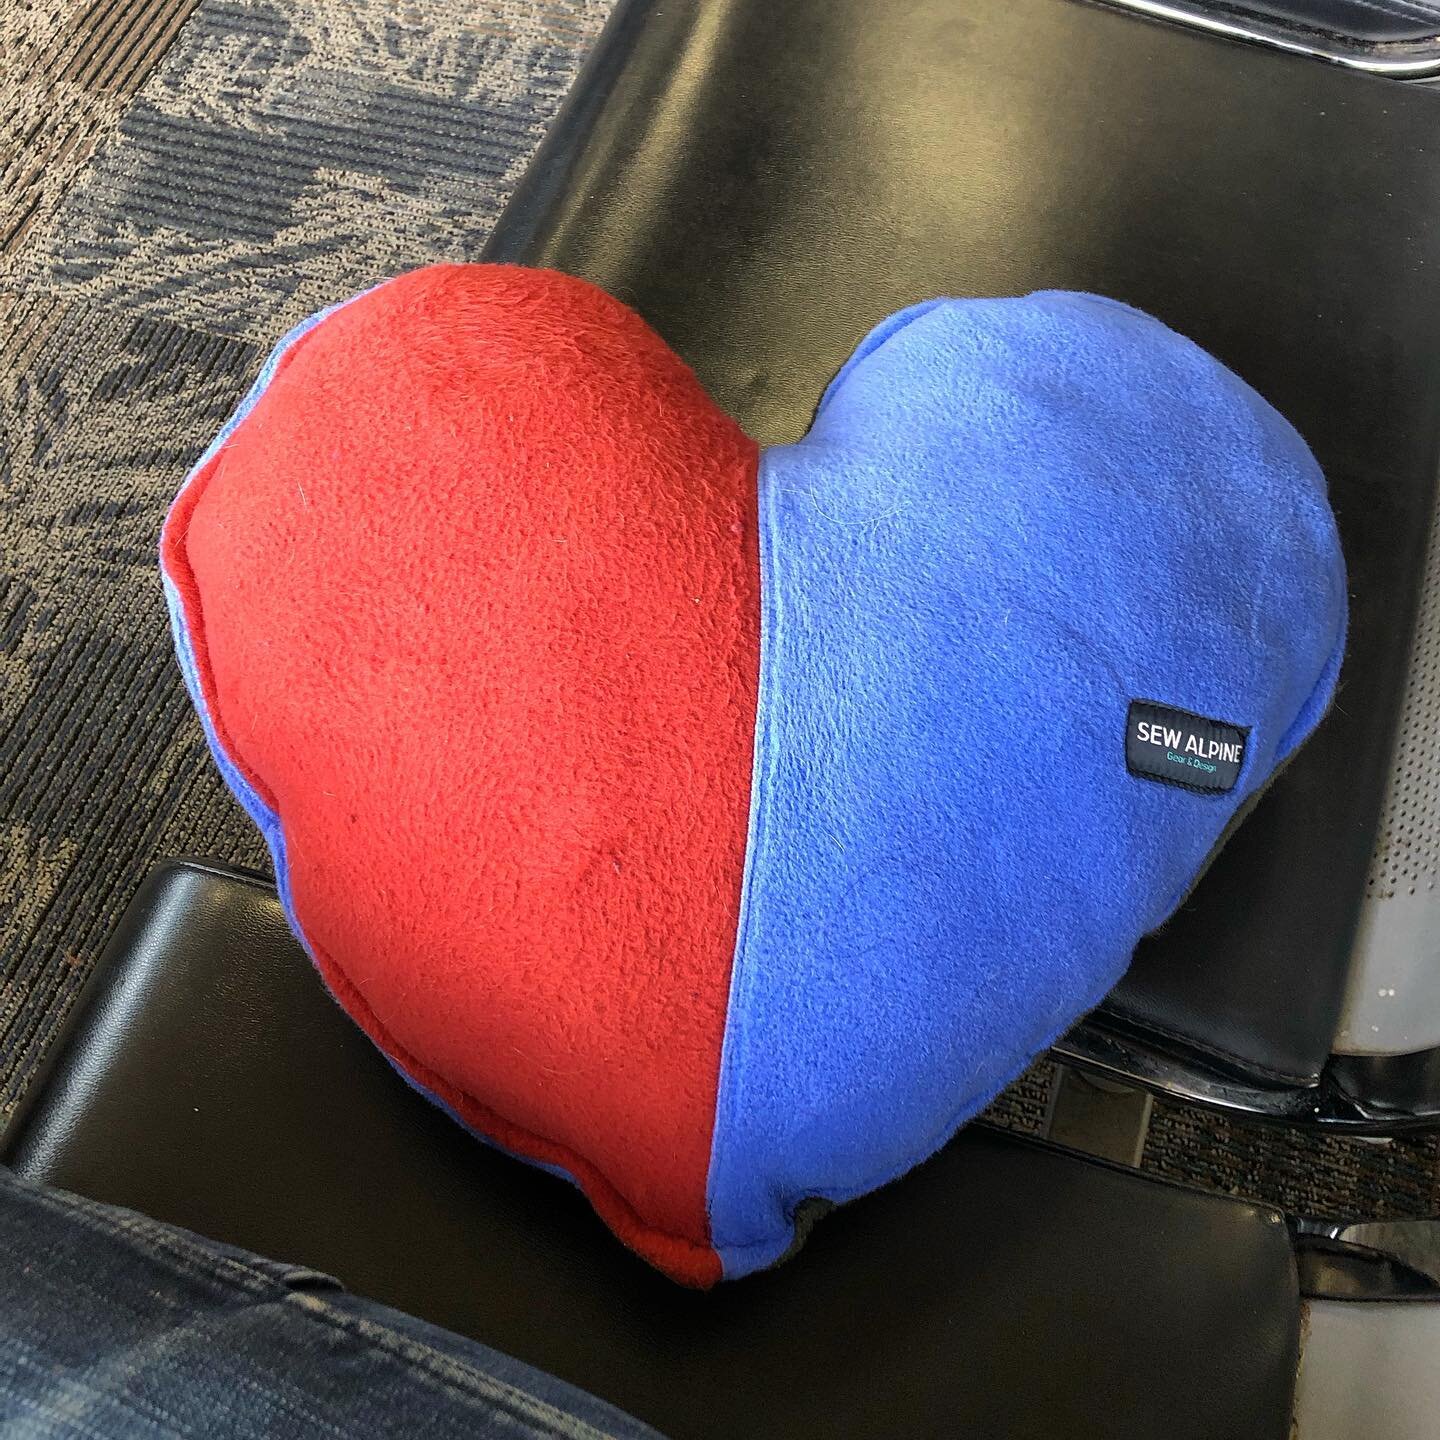 This project was out of my ordinary (thank goodness!) but my dad just had heart surgery, and friends told me that part of the recovery process is coughing while squeezing a pillow. 

So I made this overstuffed heart pillow with fleece scrap (note the